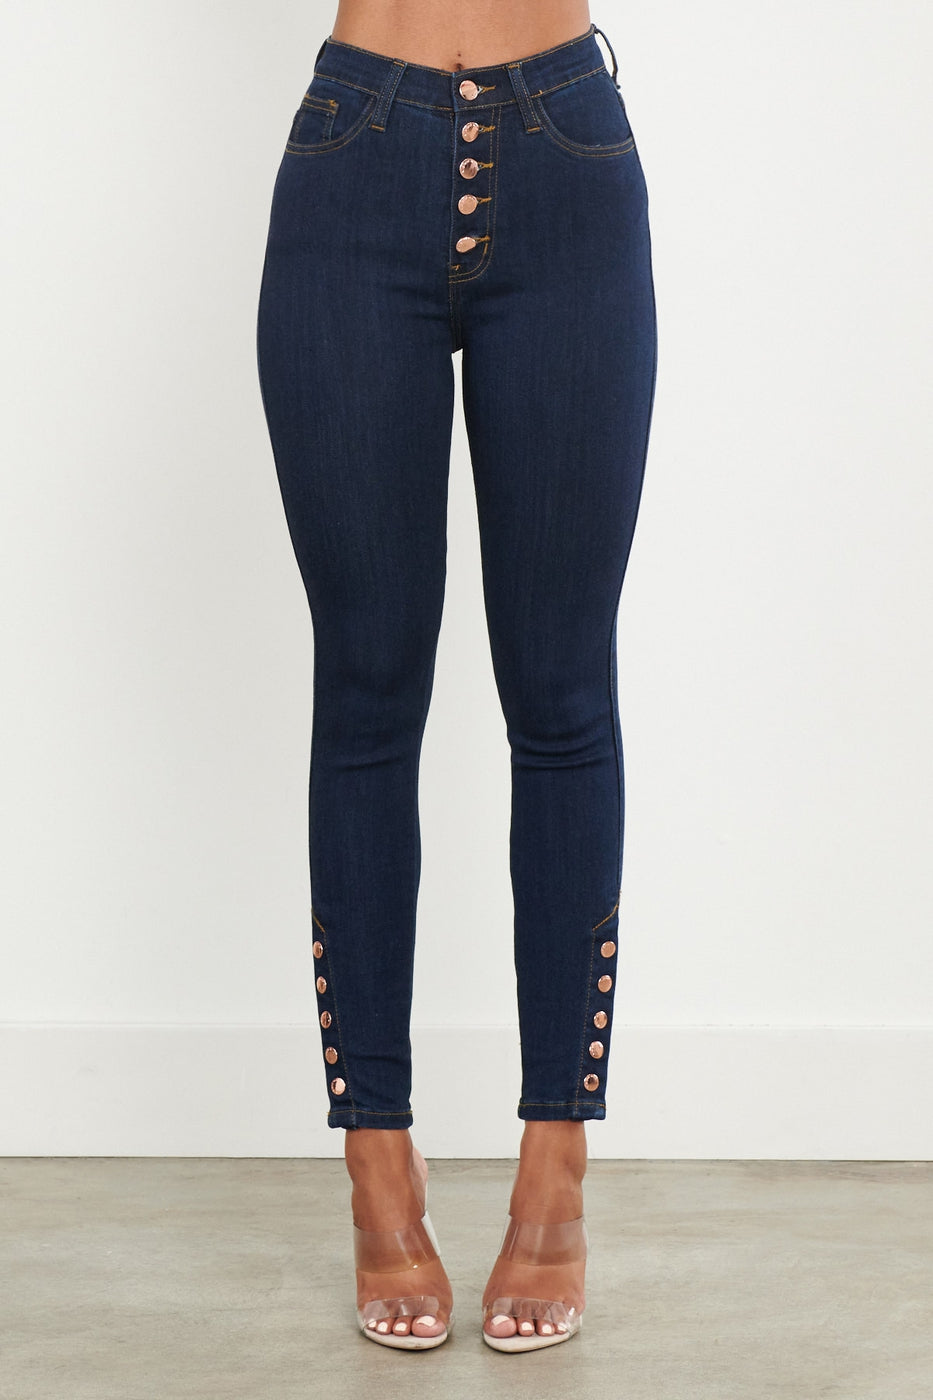 XOXO Rose Gold 5 Button Skinny Jeans – Divine Lily Silhouette